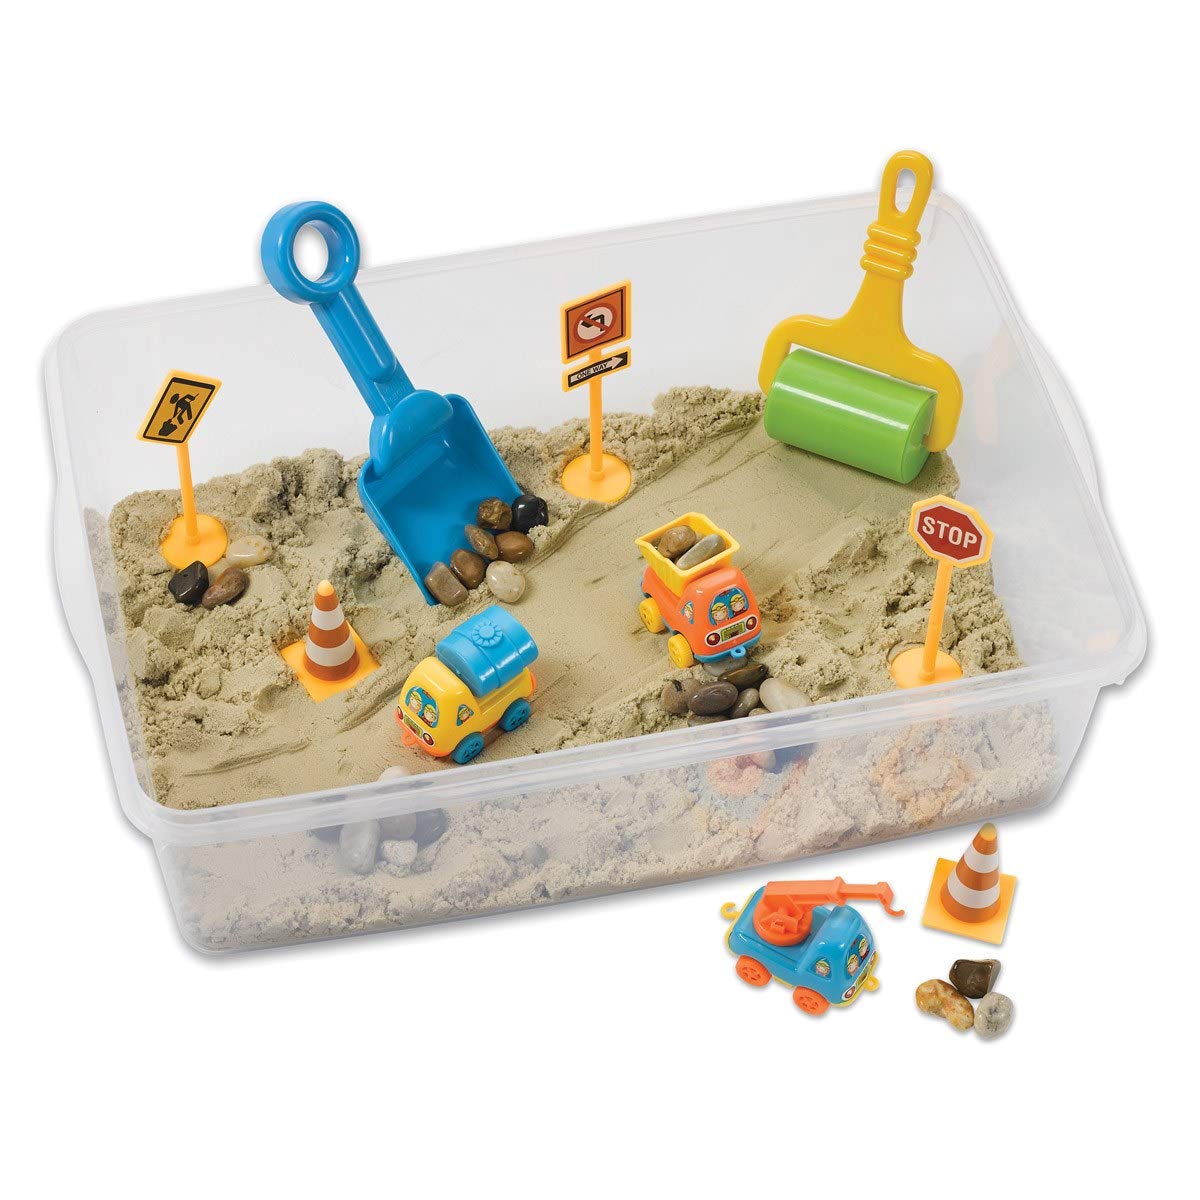 Creativity for Kids Sensory Playset Bin Sets (Construction Zone, Dinosaur Dig, Garden & Critters, Ocean & Sand, Outerspace) $12.97 + Free Shipping w/ Prime or on $35+